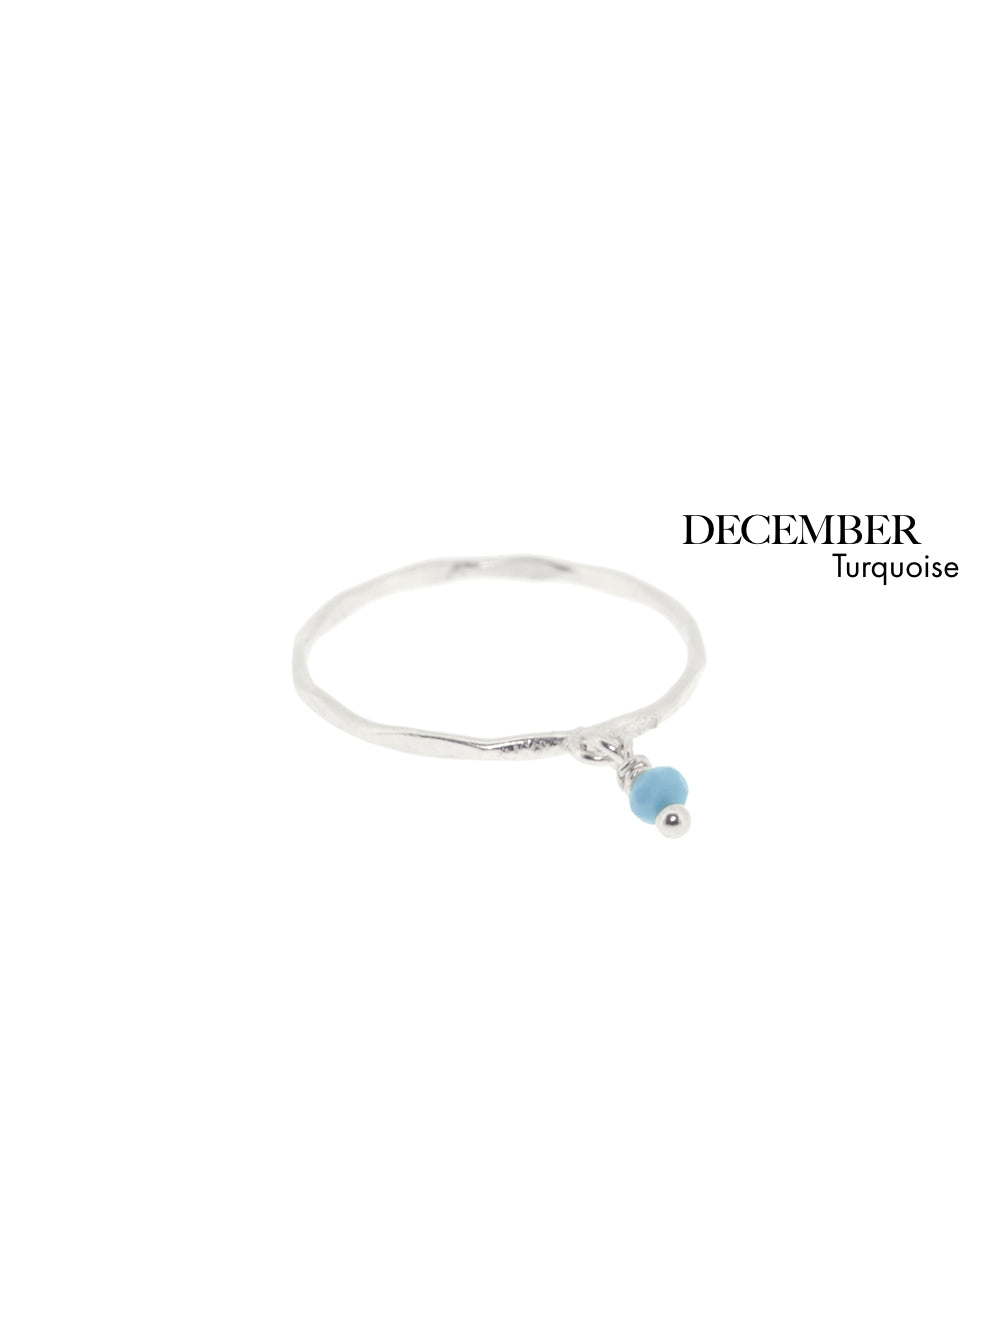 Birthstone ring December - Turquoise | 925 Sterling Silver